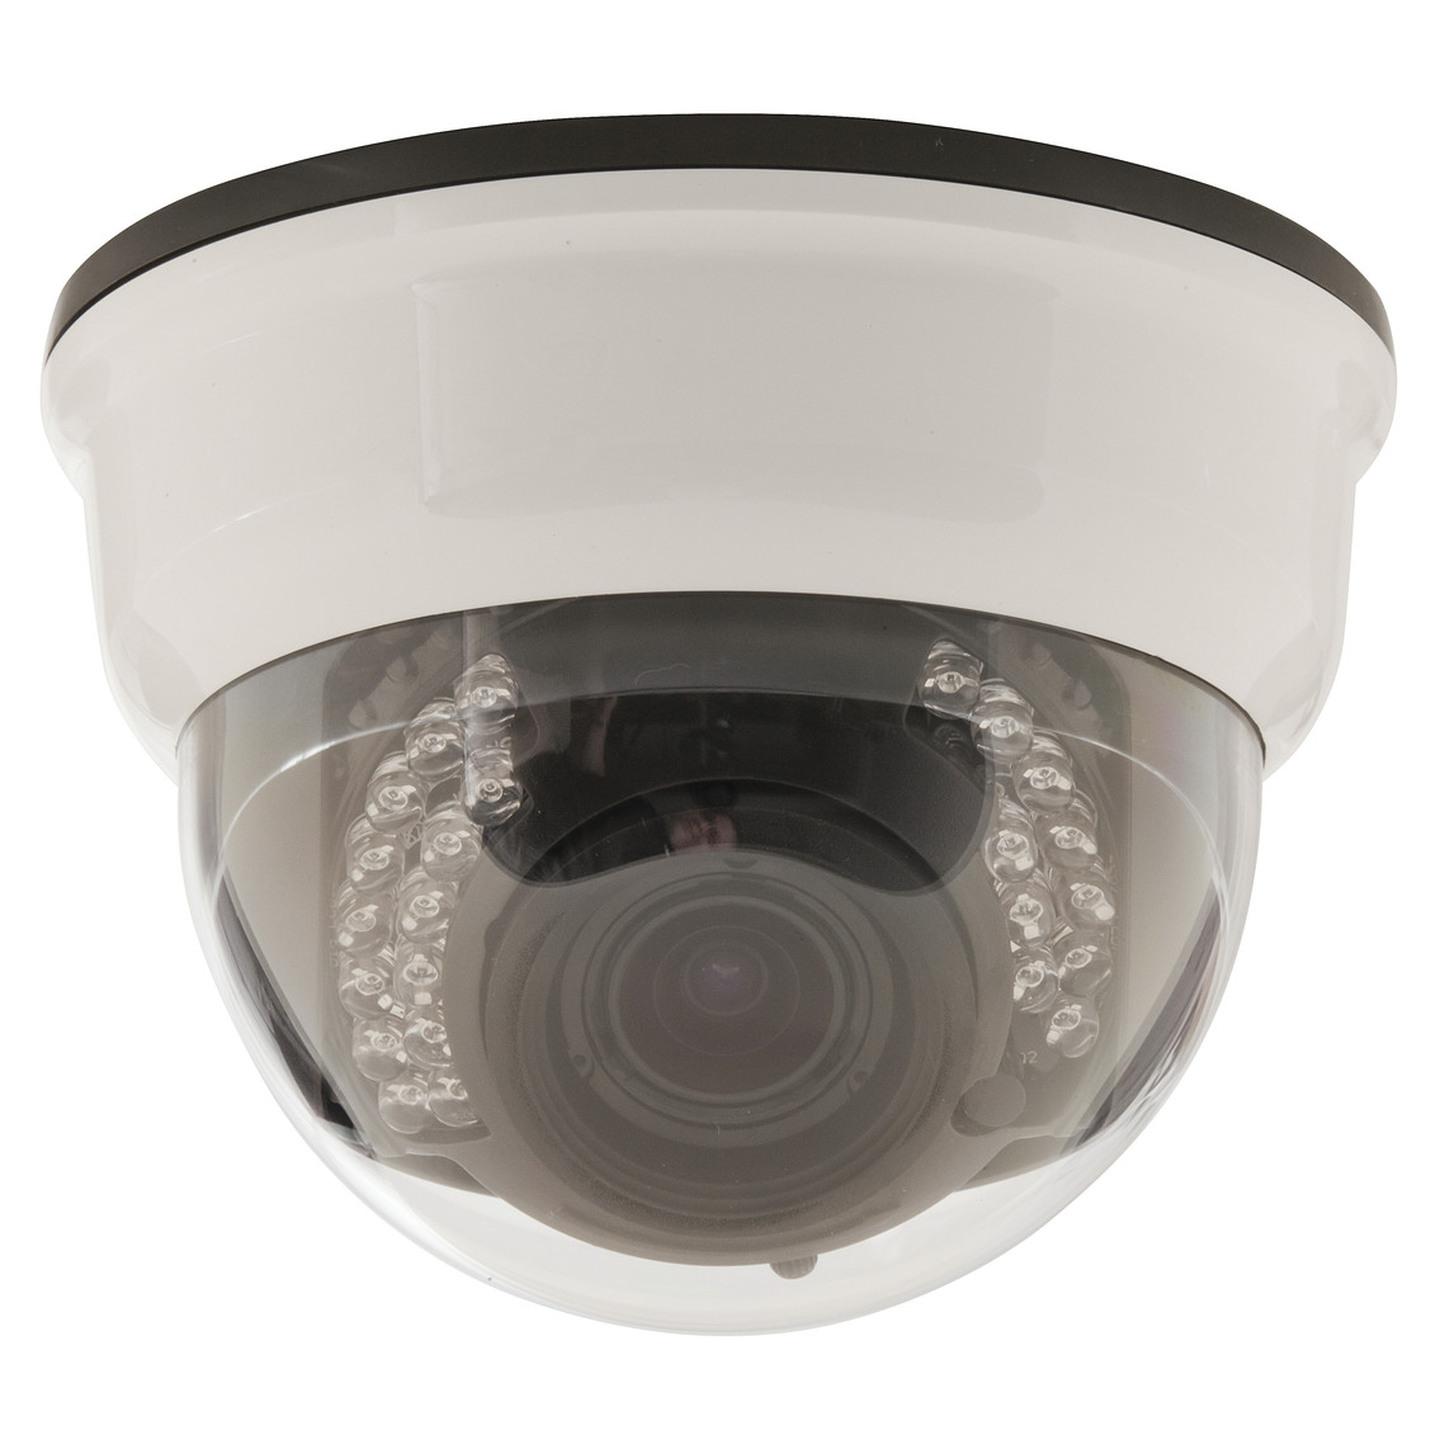 3-Axis Dome Camera with IR 650TV Lines